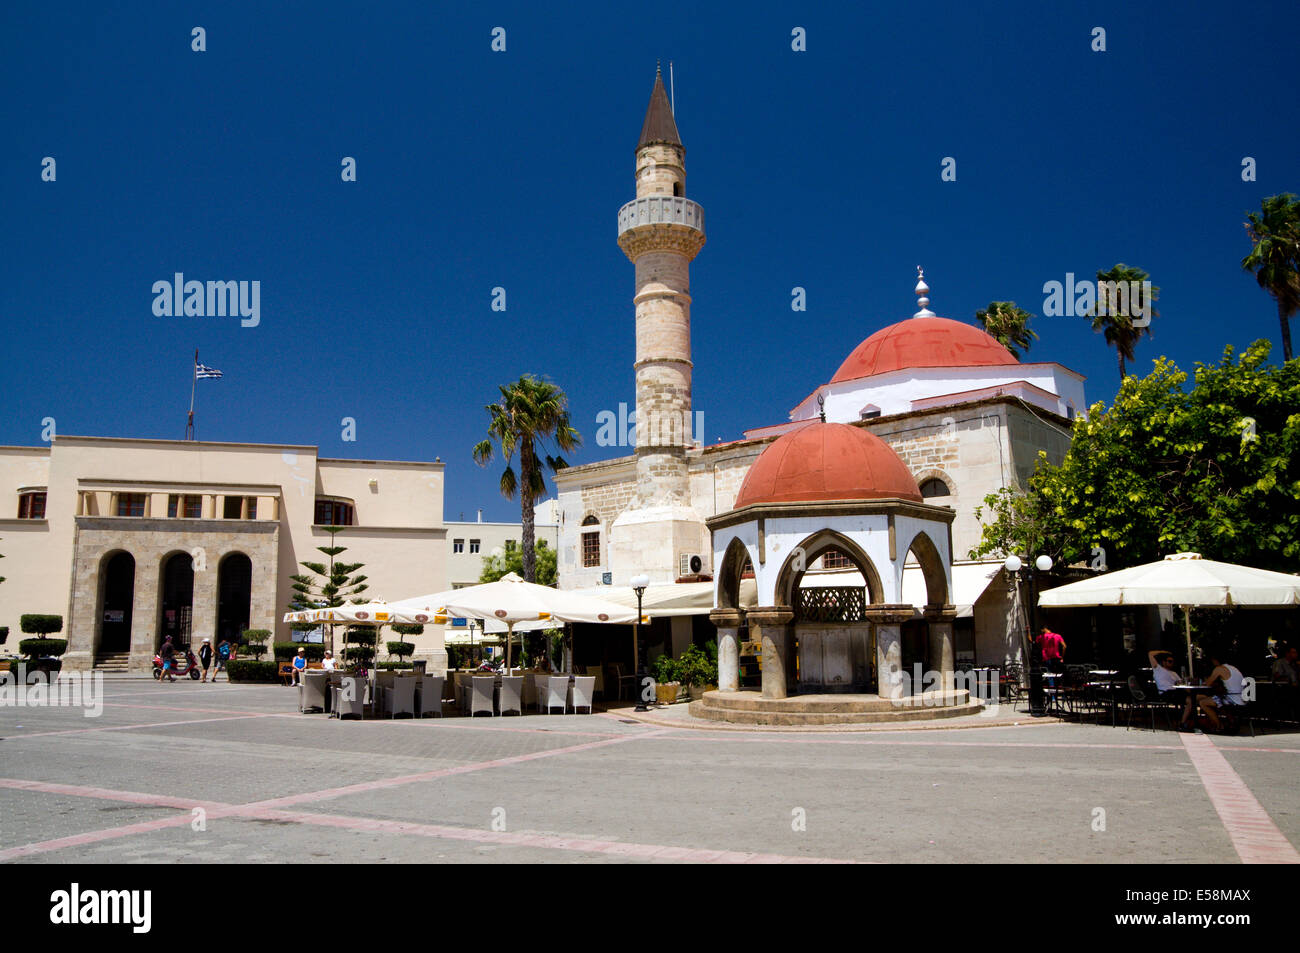 The Defender Mosque a remnant of the Ottoman occupation, Eleftheria Square, Kos Island, Dodecanese Islands, Greece. Stock Photo